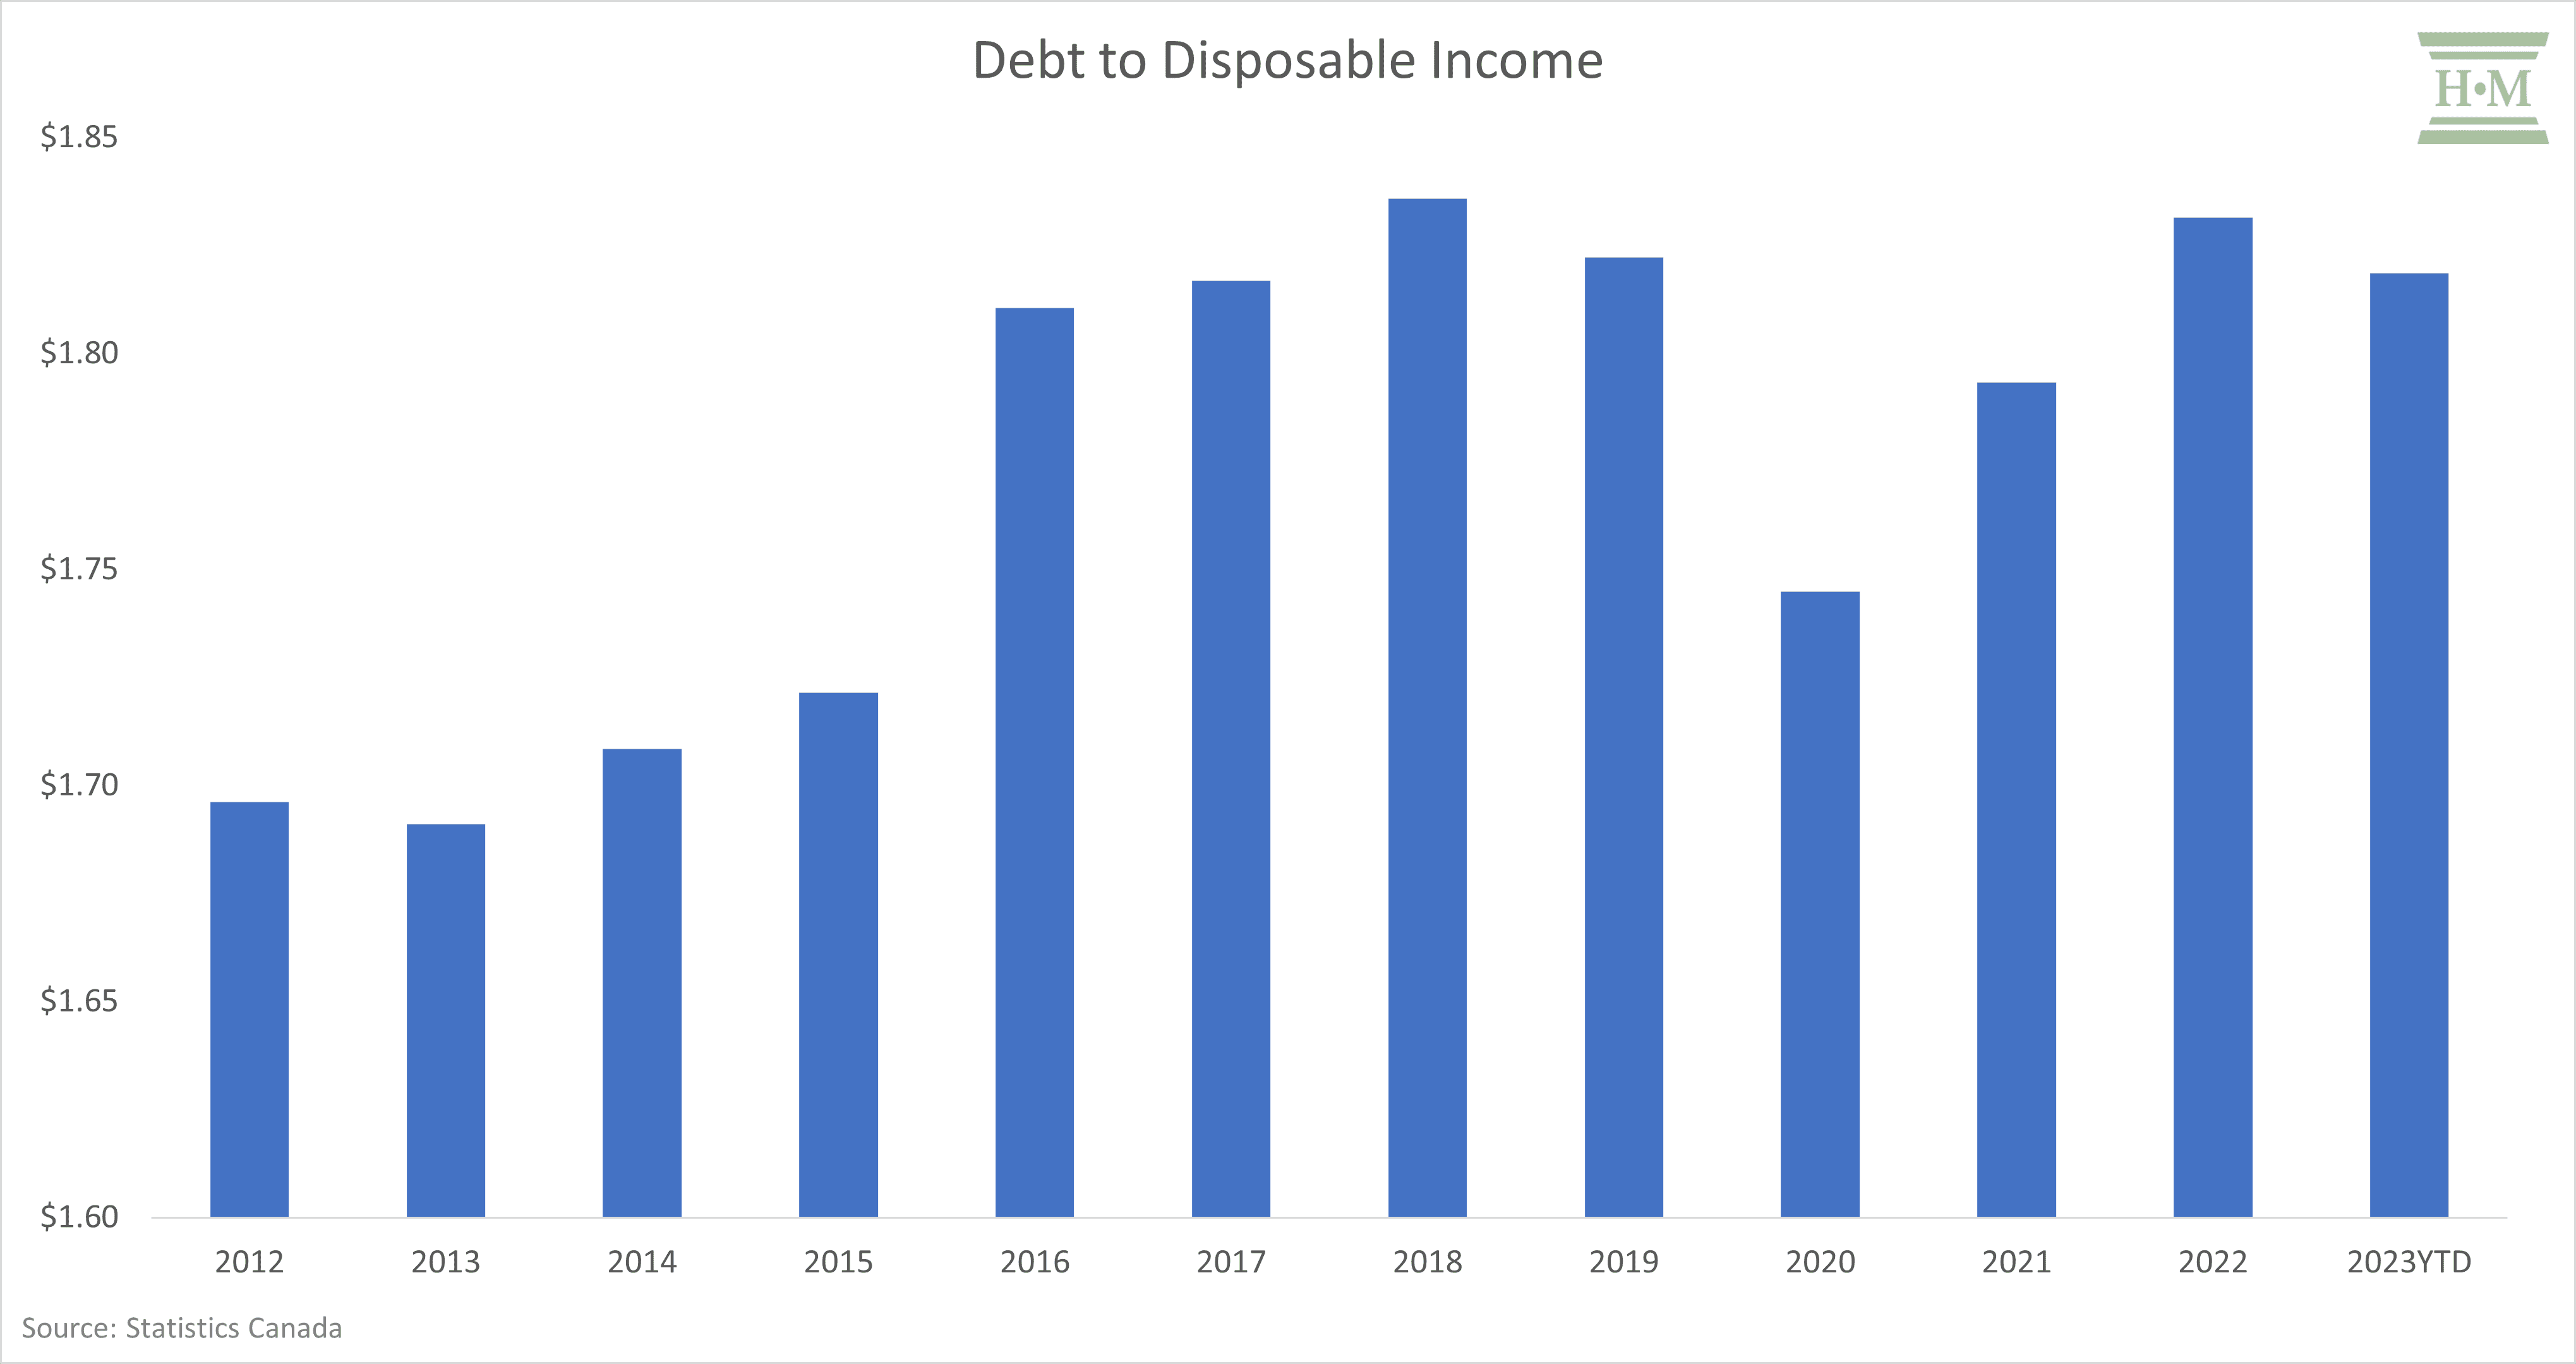 Debt to Disposable Income